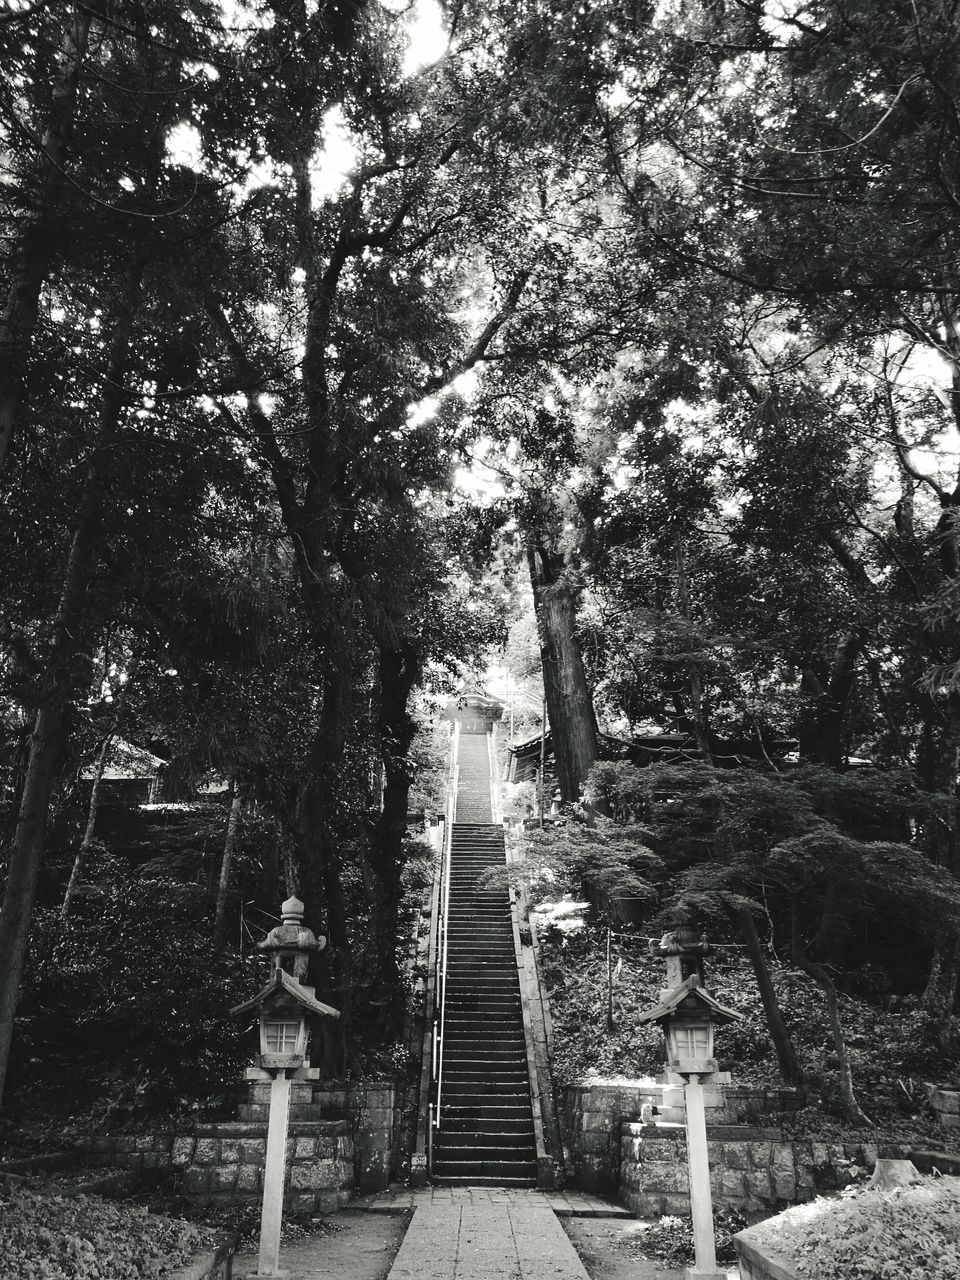 VIEW OF STAIRS IN PARK